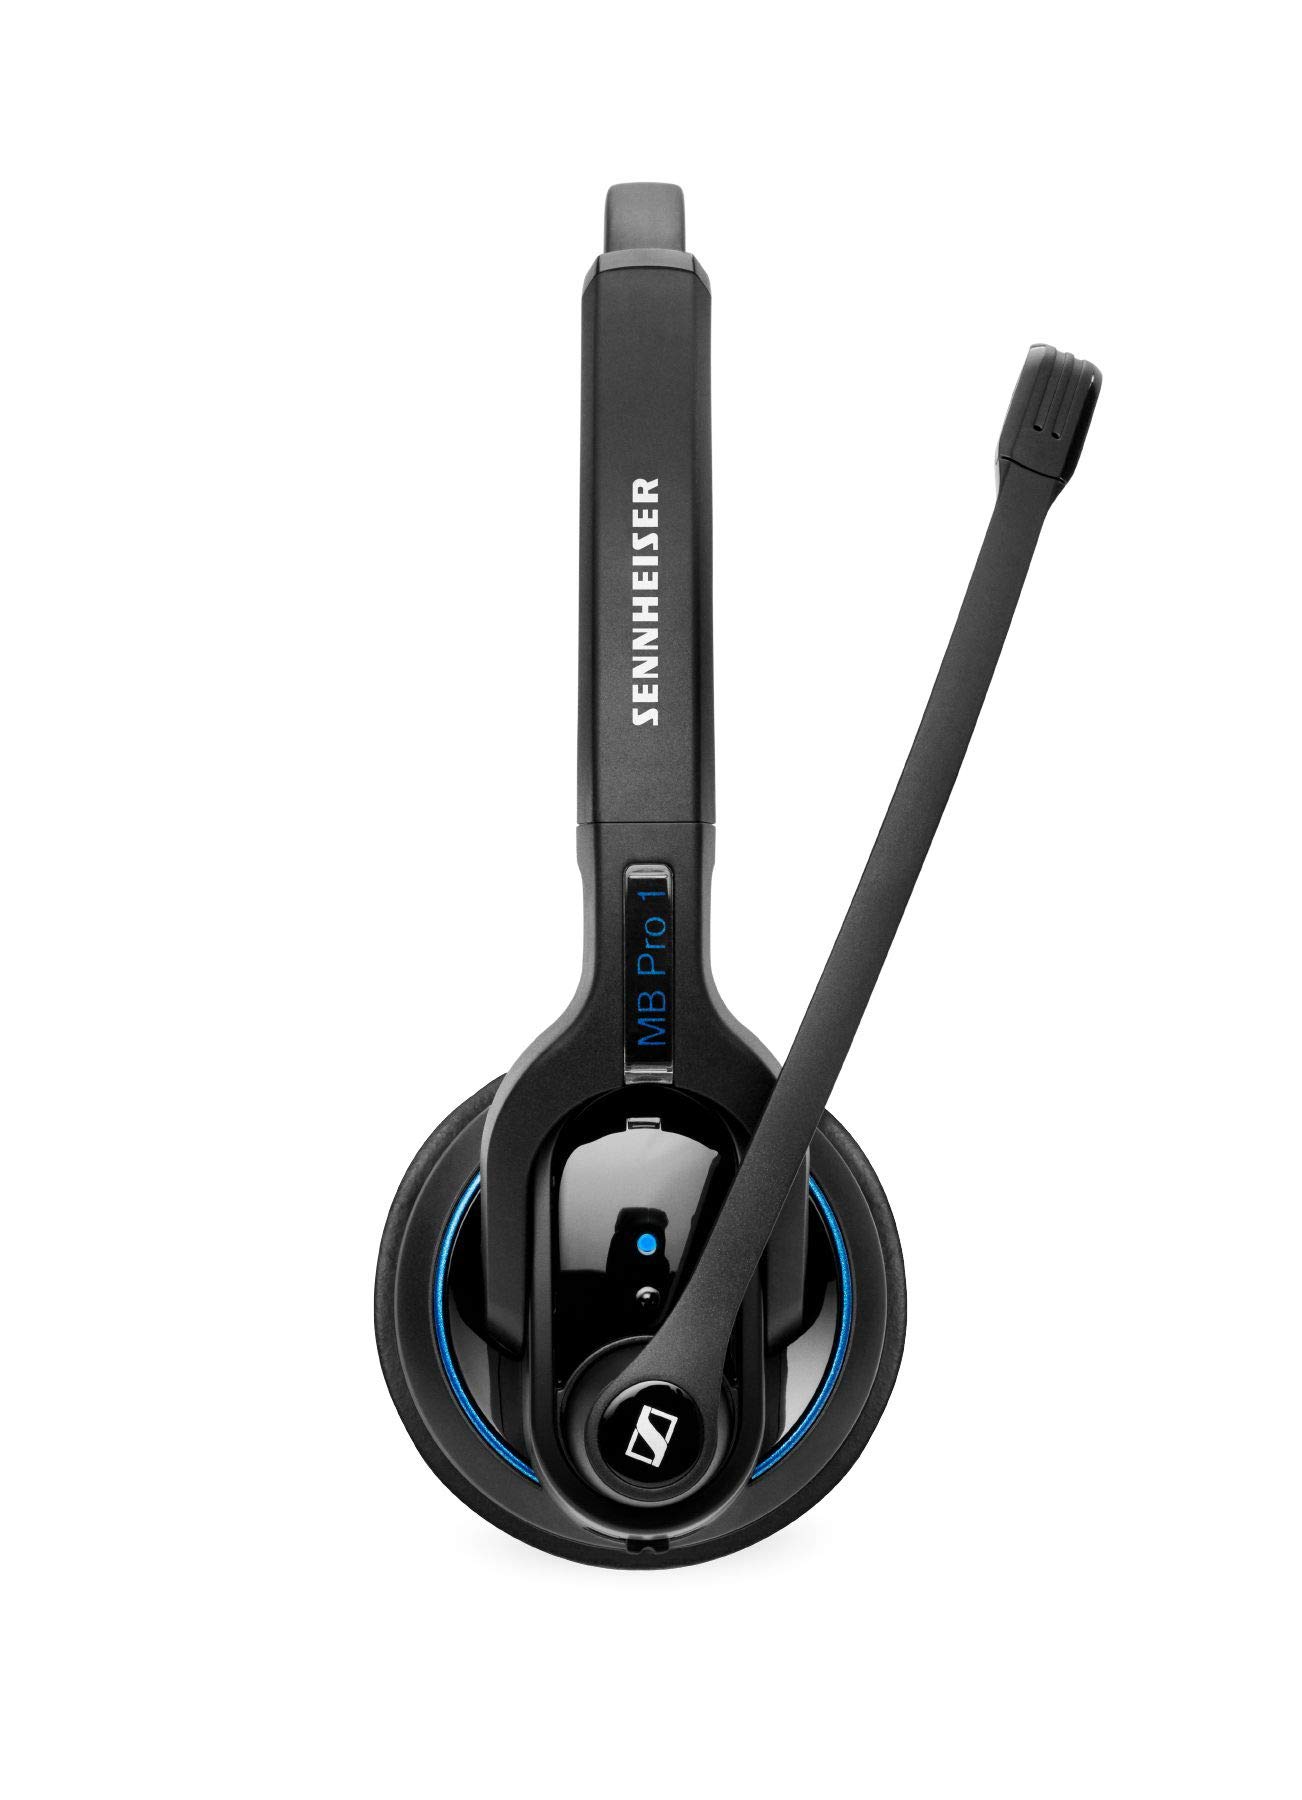 Sennheiser MB Pro 1 (506041) - Single-Sided, Wireless Bluetooth Headset | For Mobile Phone Connection | w/ HD Sound & Noise Cancelling Microphone (Black)